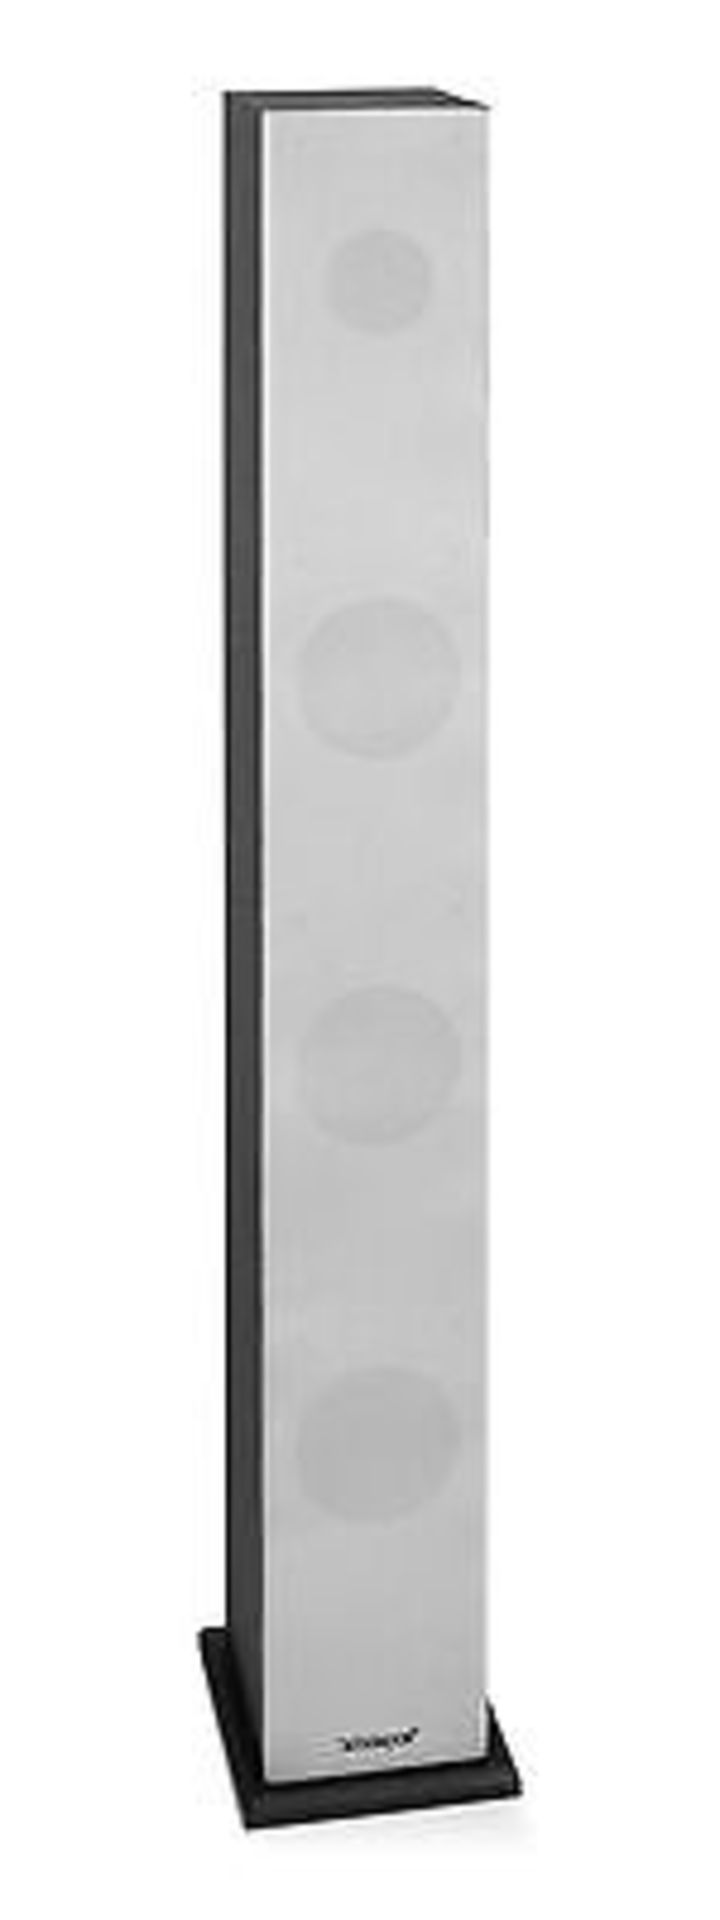 V Brand New Intempo Large Bluetooth Tower Speaker - Wooden Case and Base - 100cm Height - 2" Tweeter